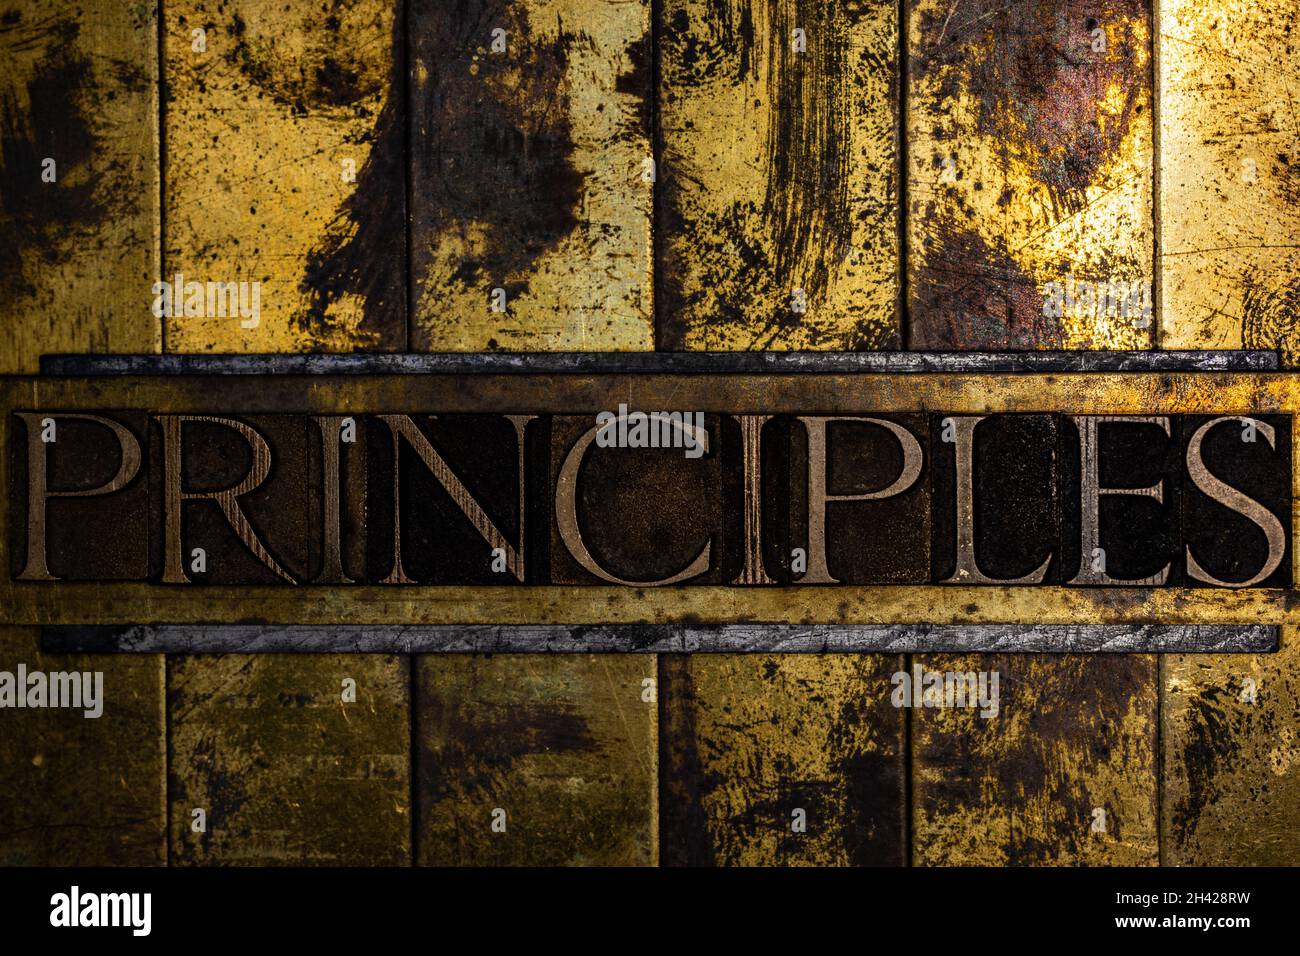 Principles text on textured grunge copper and vintage gold background Stock Photo